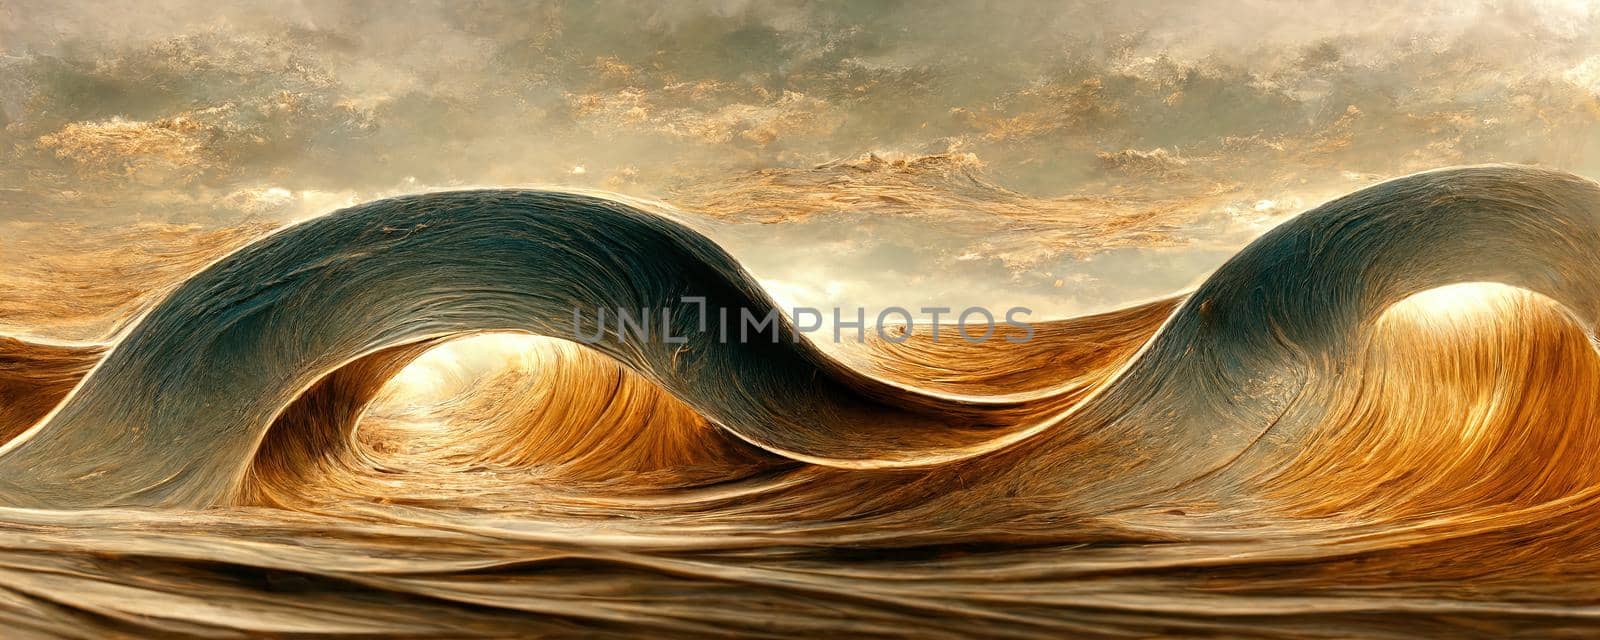 golden waves we are on a stylish background.